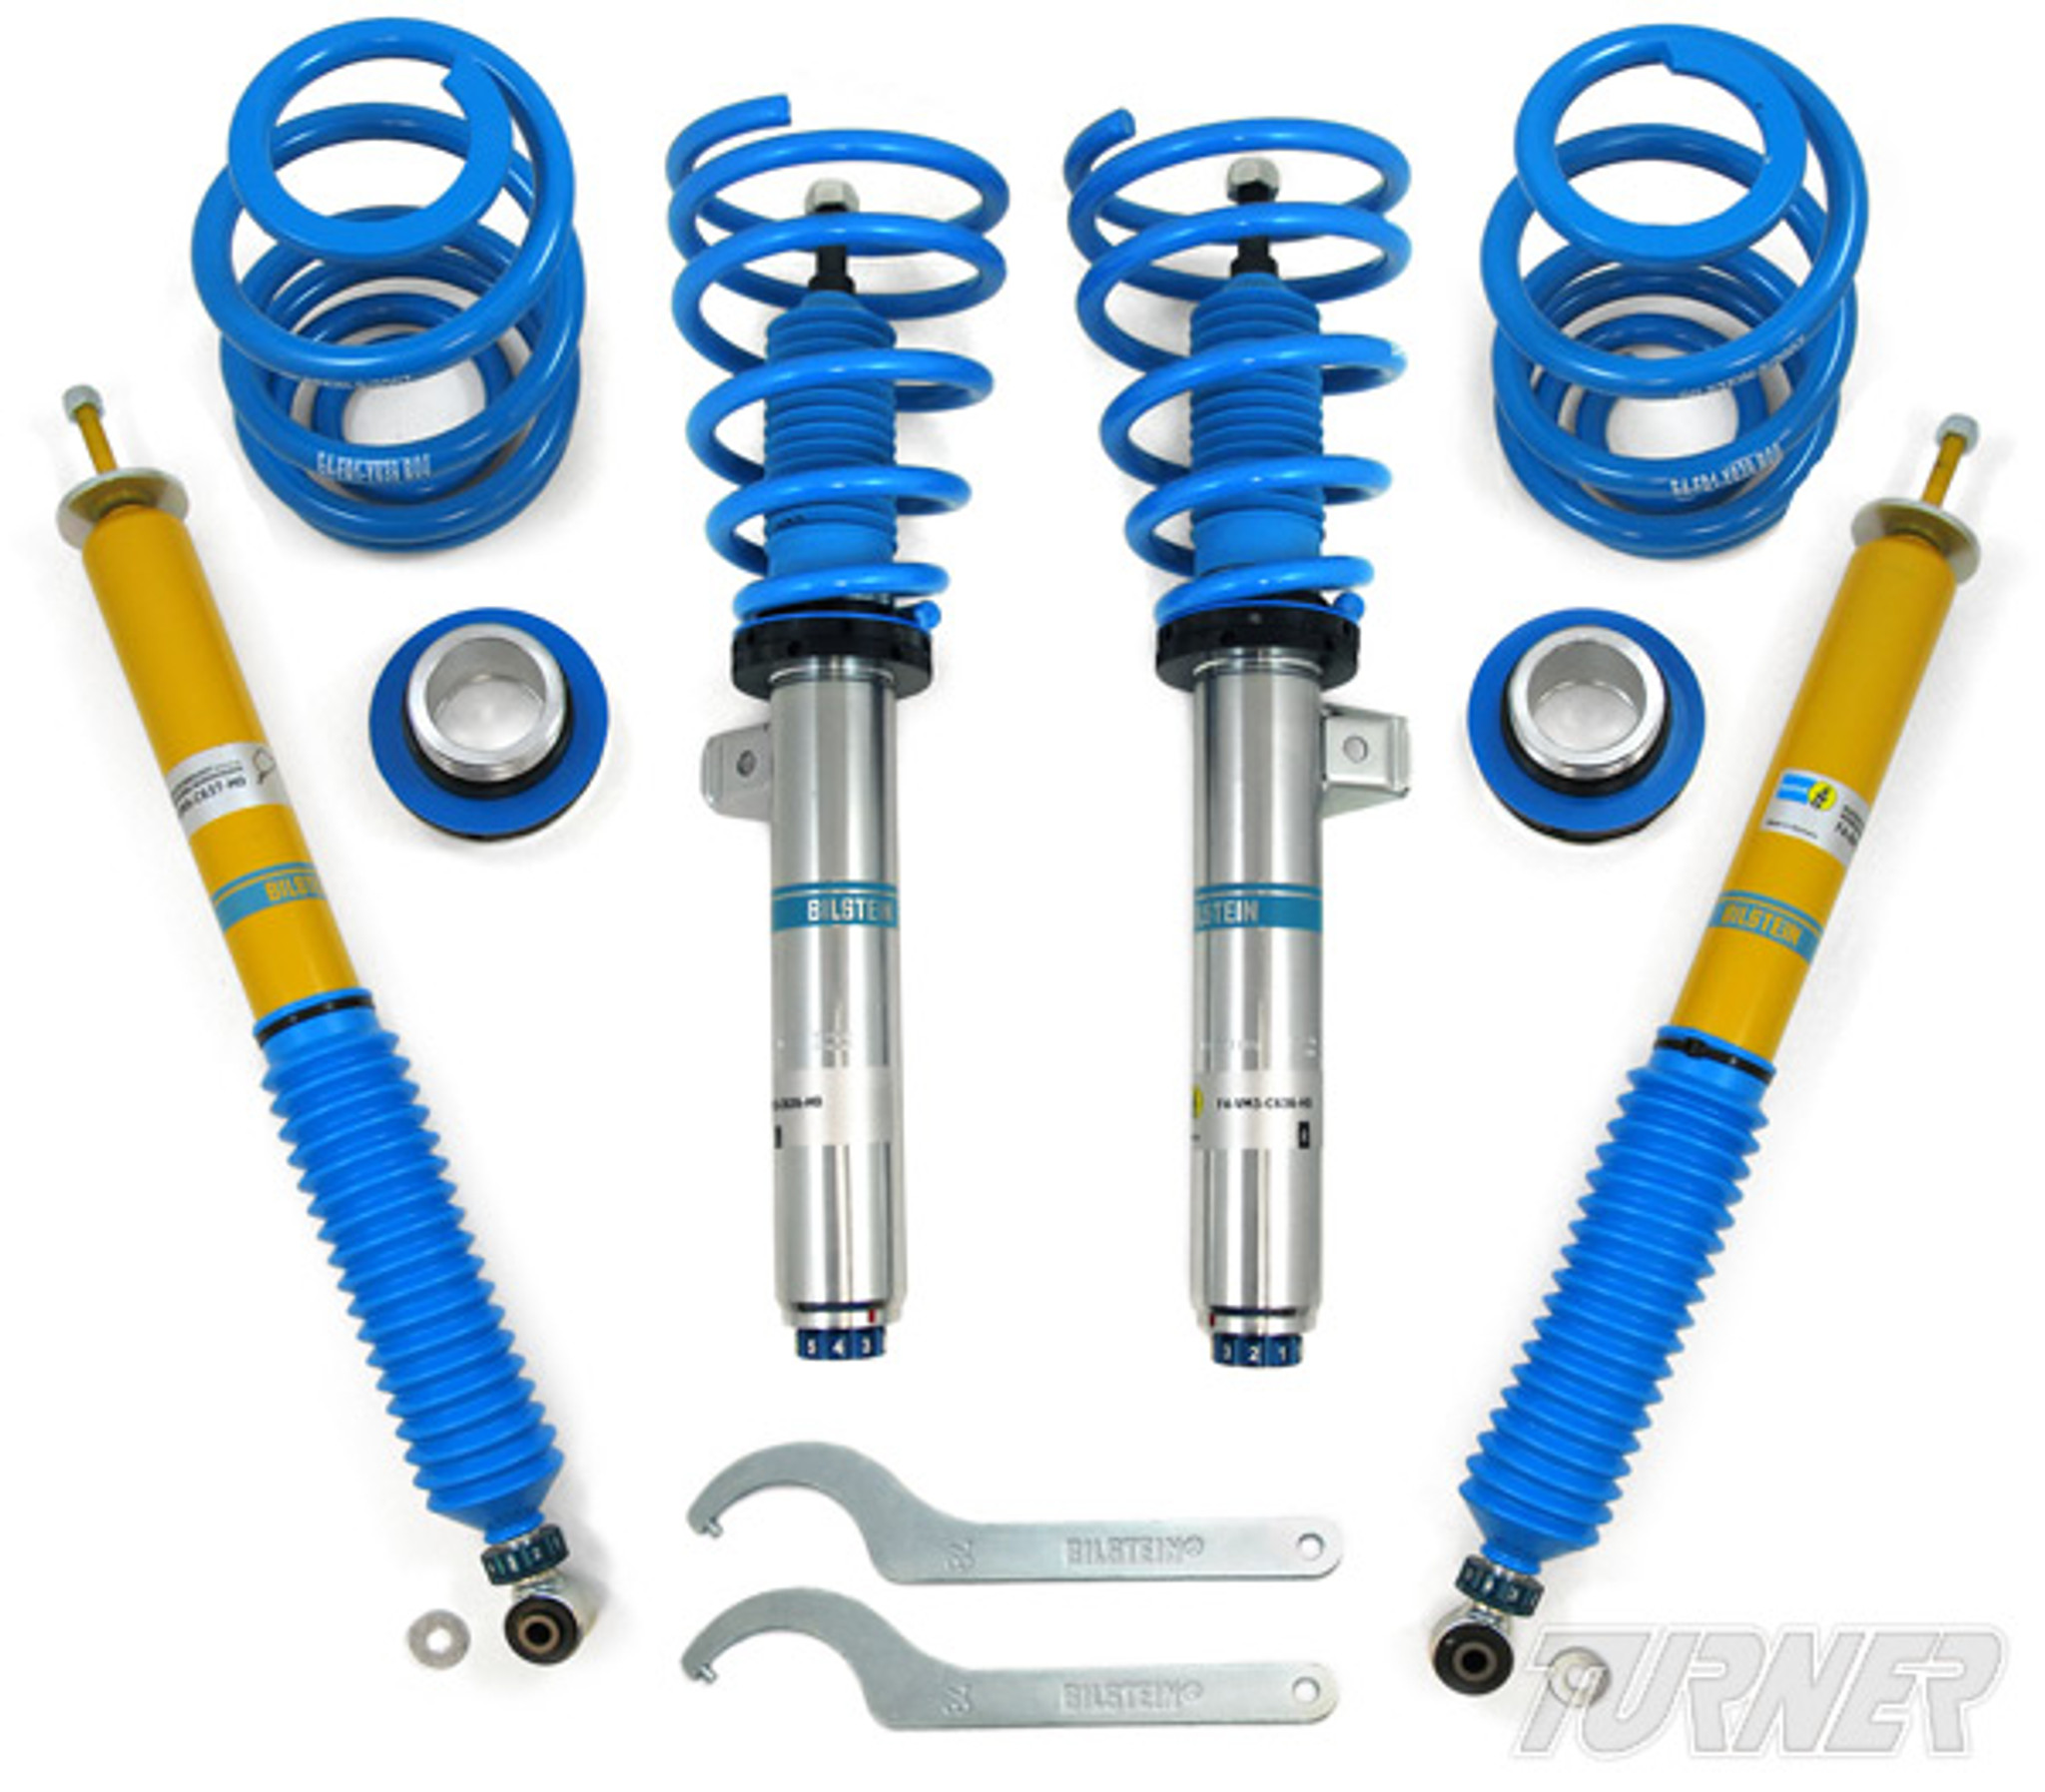 Bilstein B14 coilovers for your BMW F30 3-Series